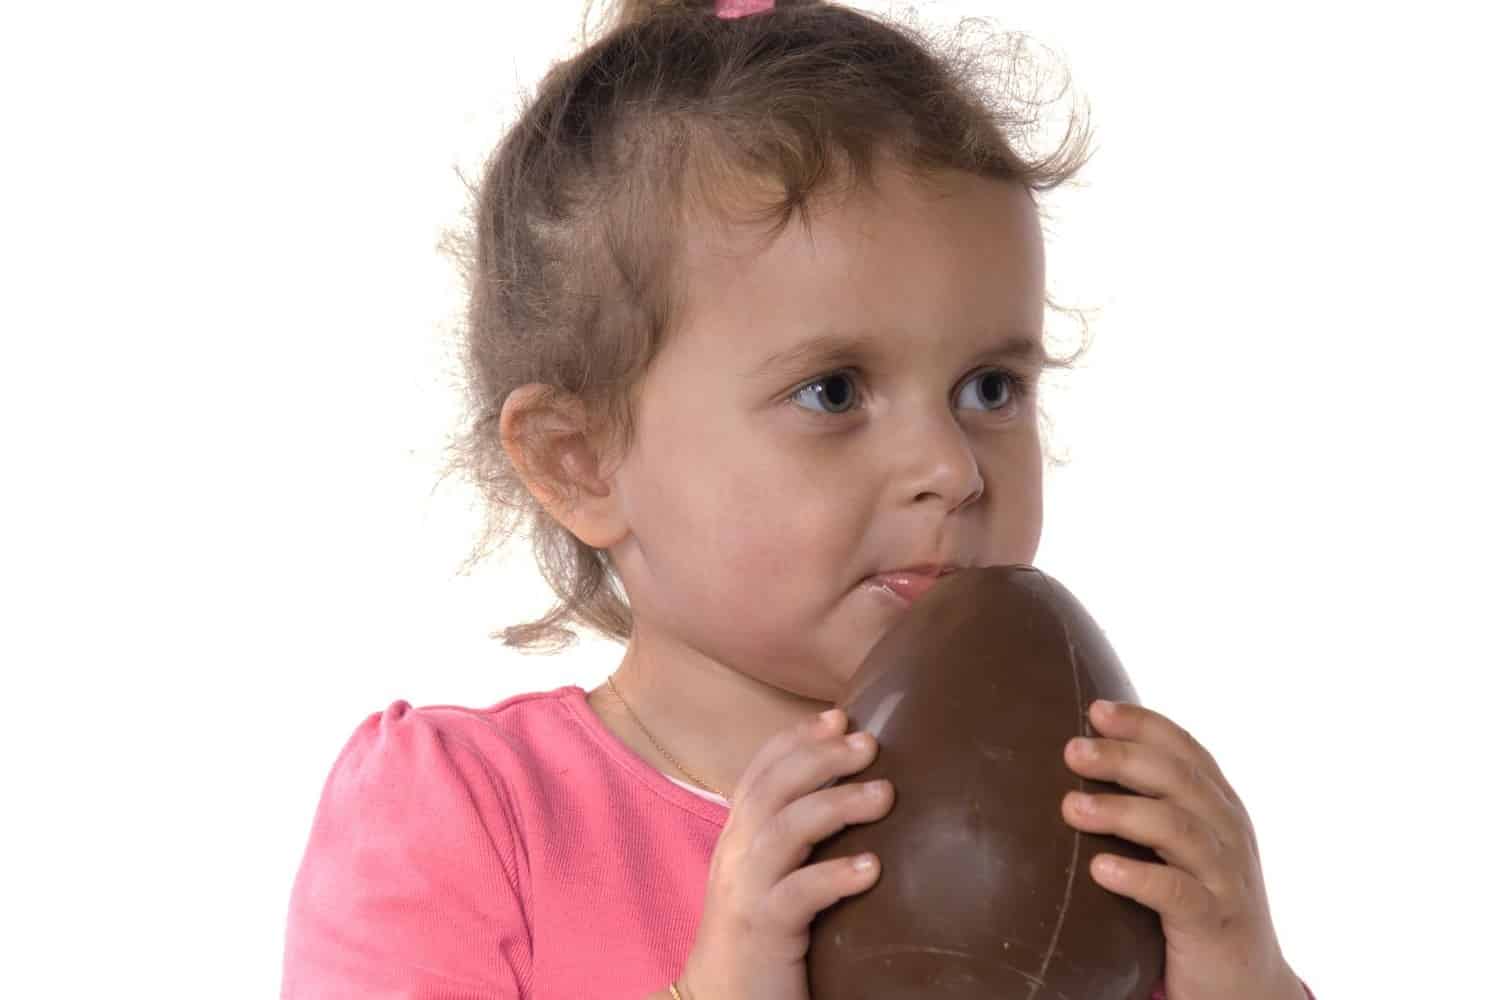 do we support children eating chocolate eggs at Easter